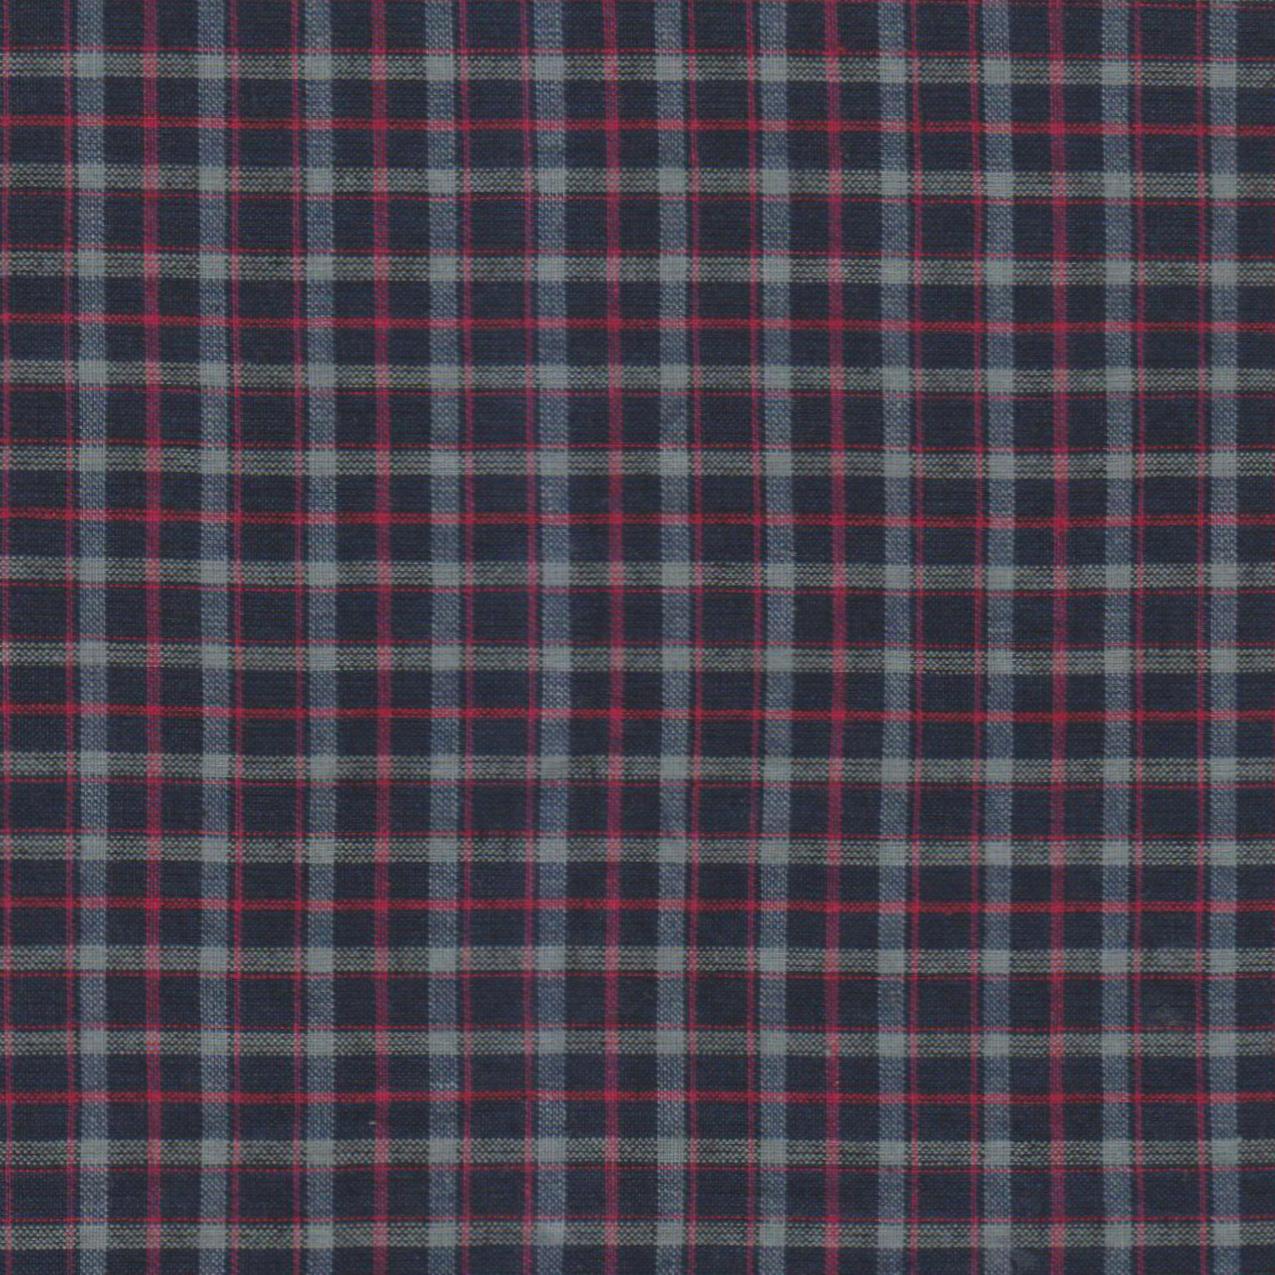 Rustic Red and Tan Check Plaid Fabric Swatch 4" x 4"